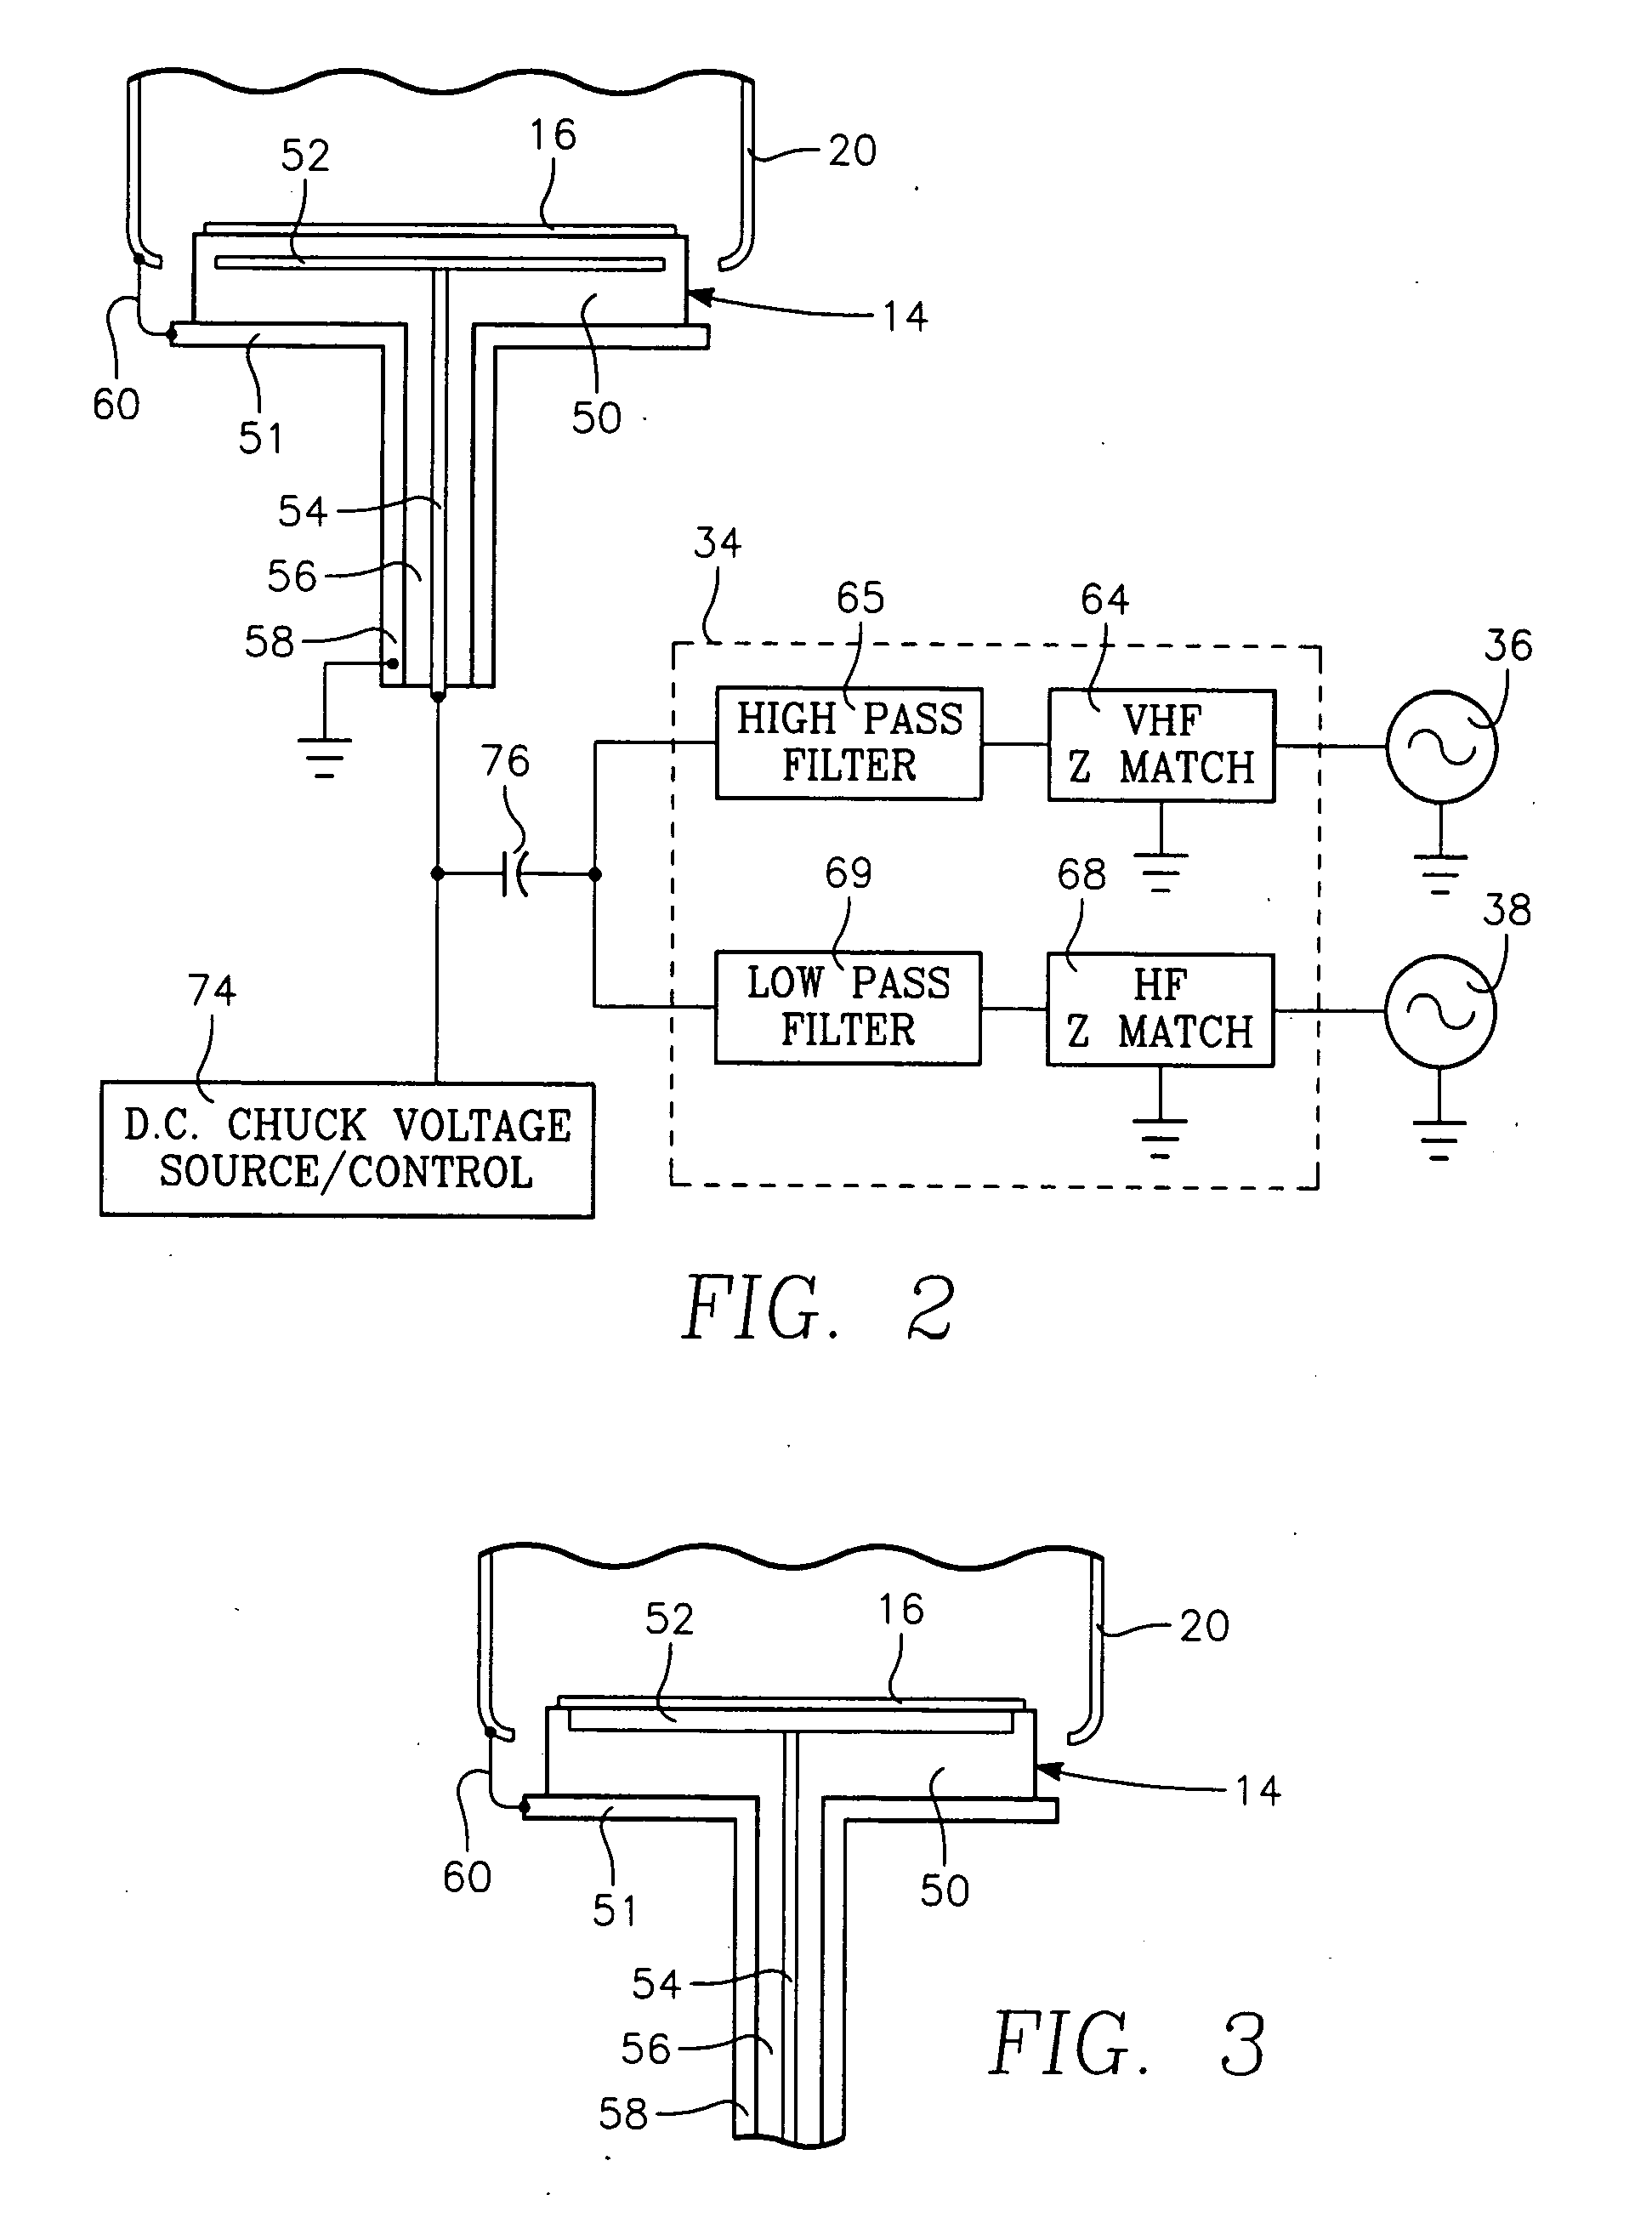 Physical vapor deposition plasma reactor with RF source power applied to the target